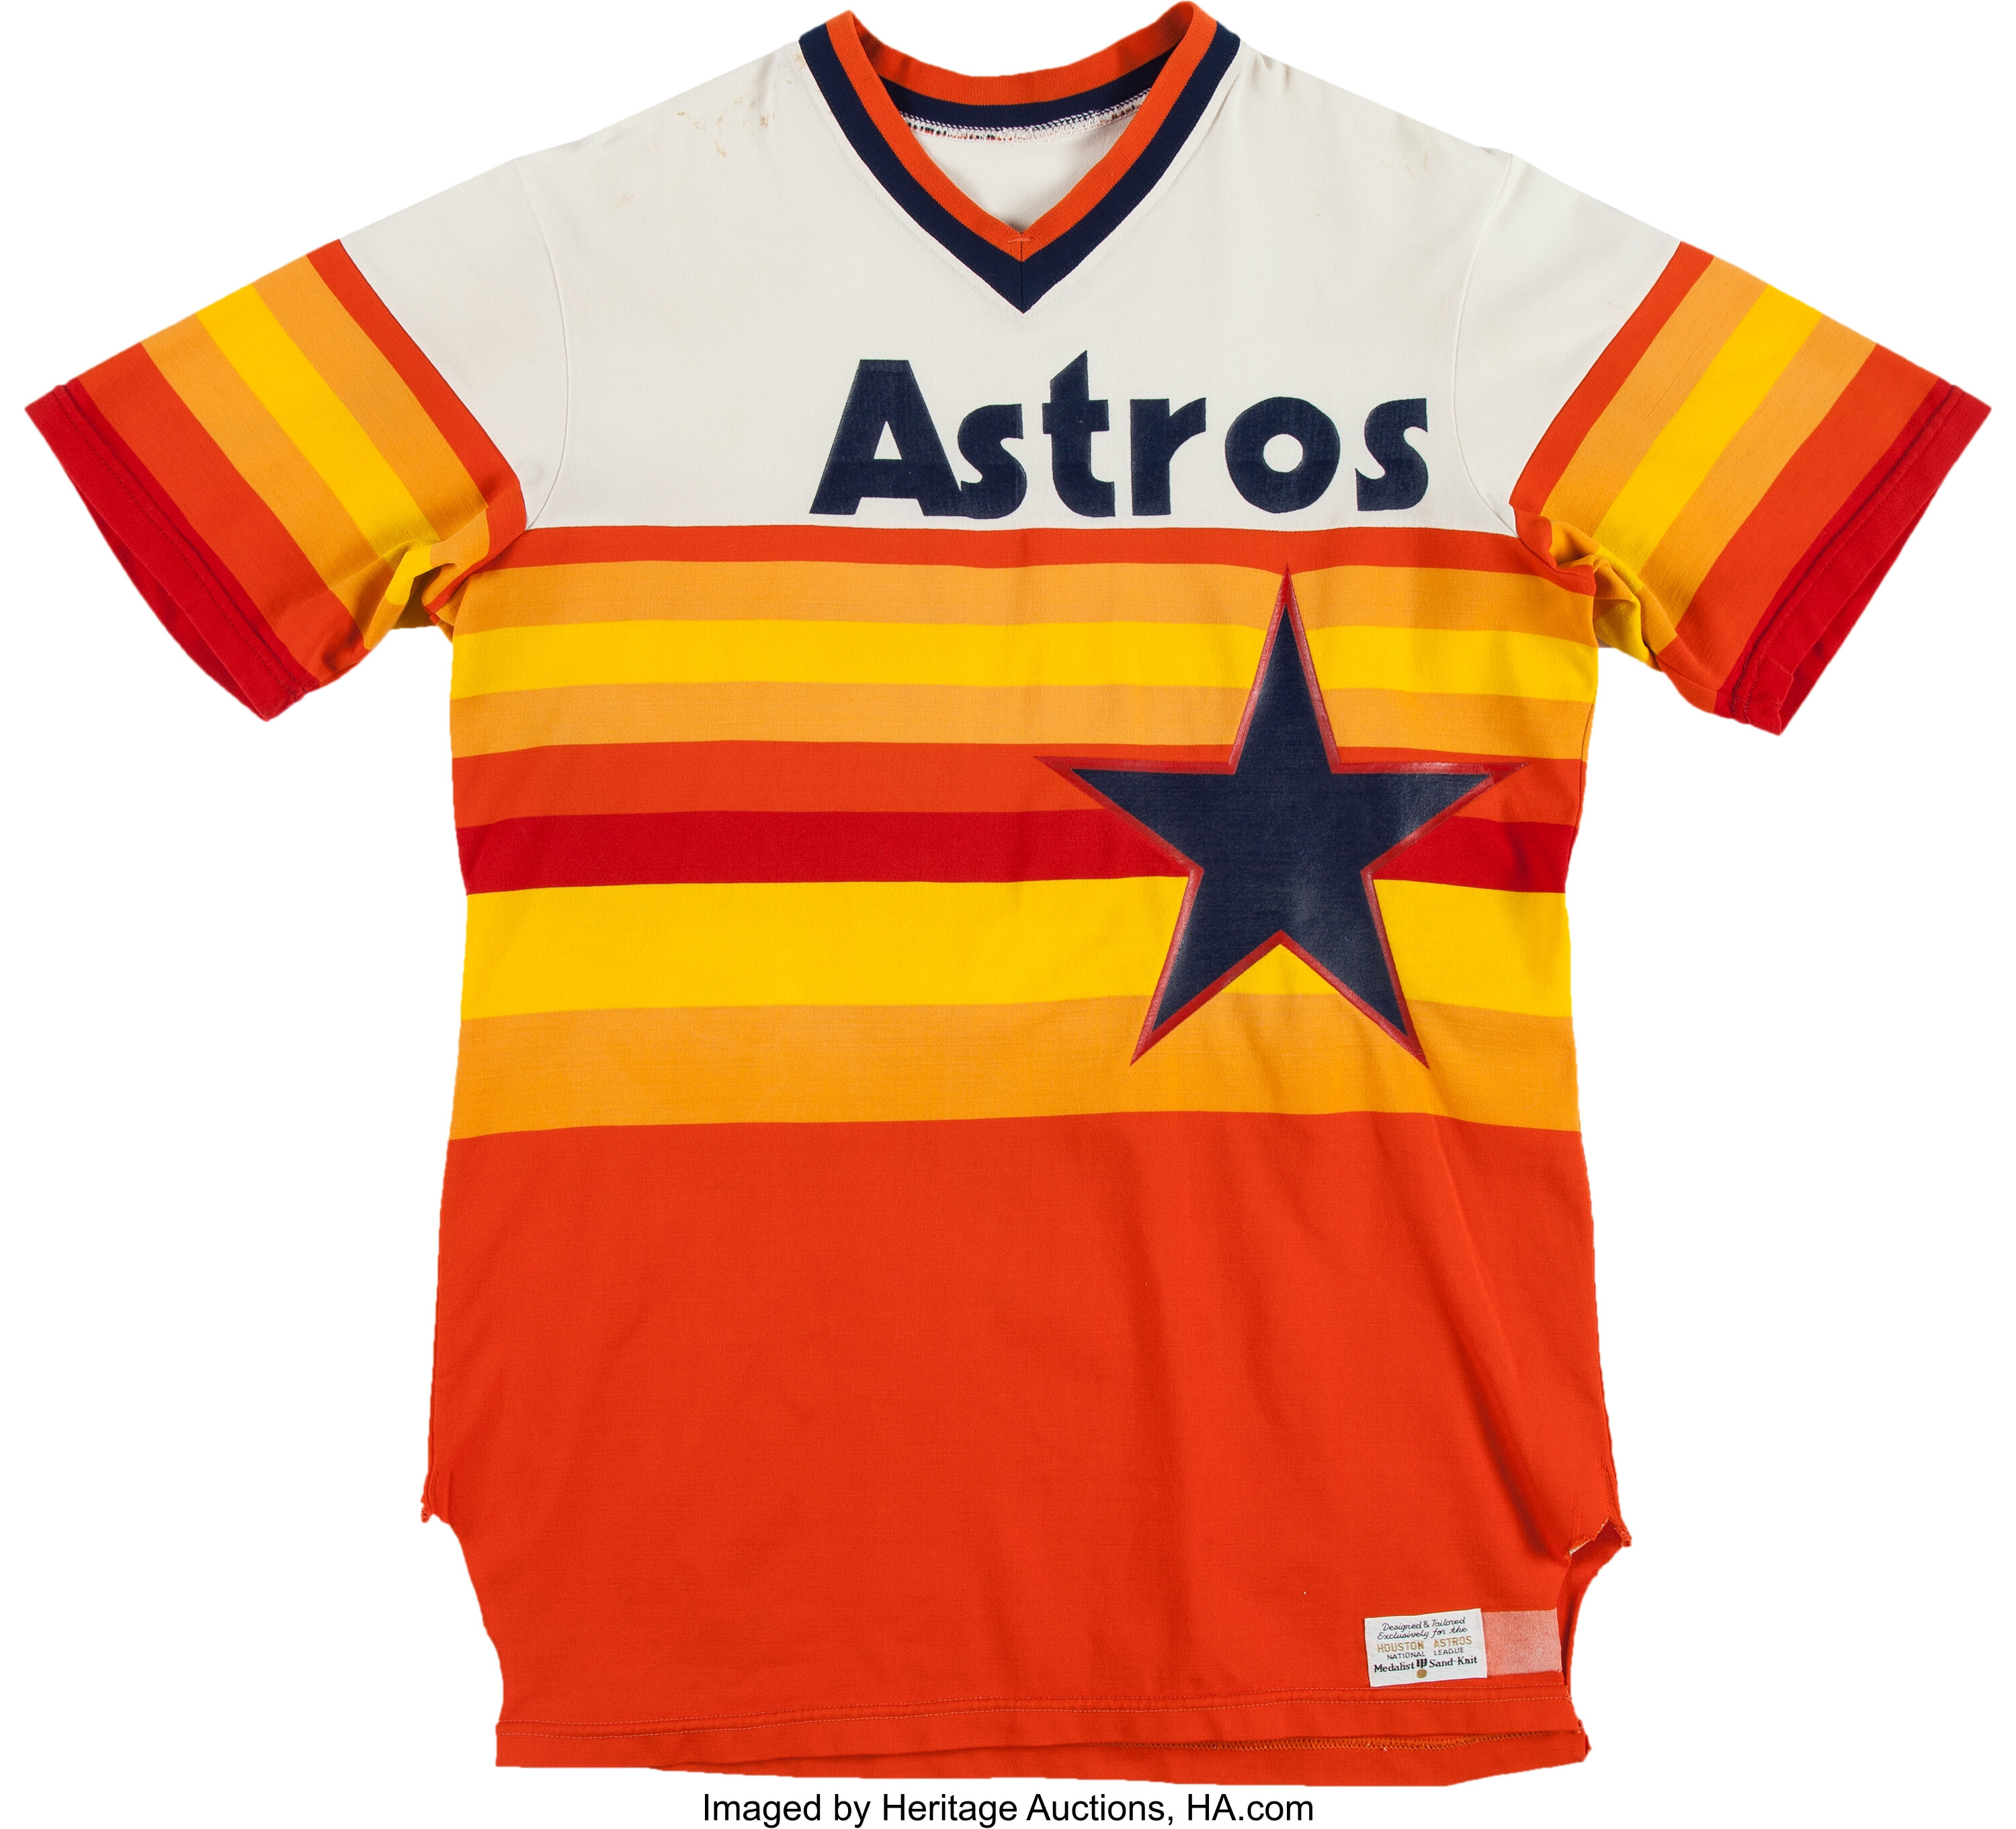 astros game today jersey